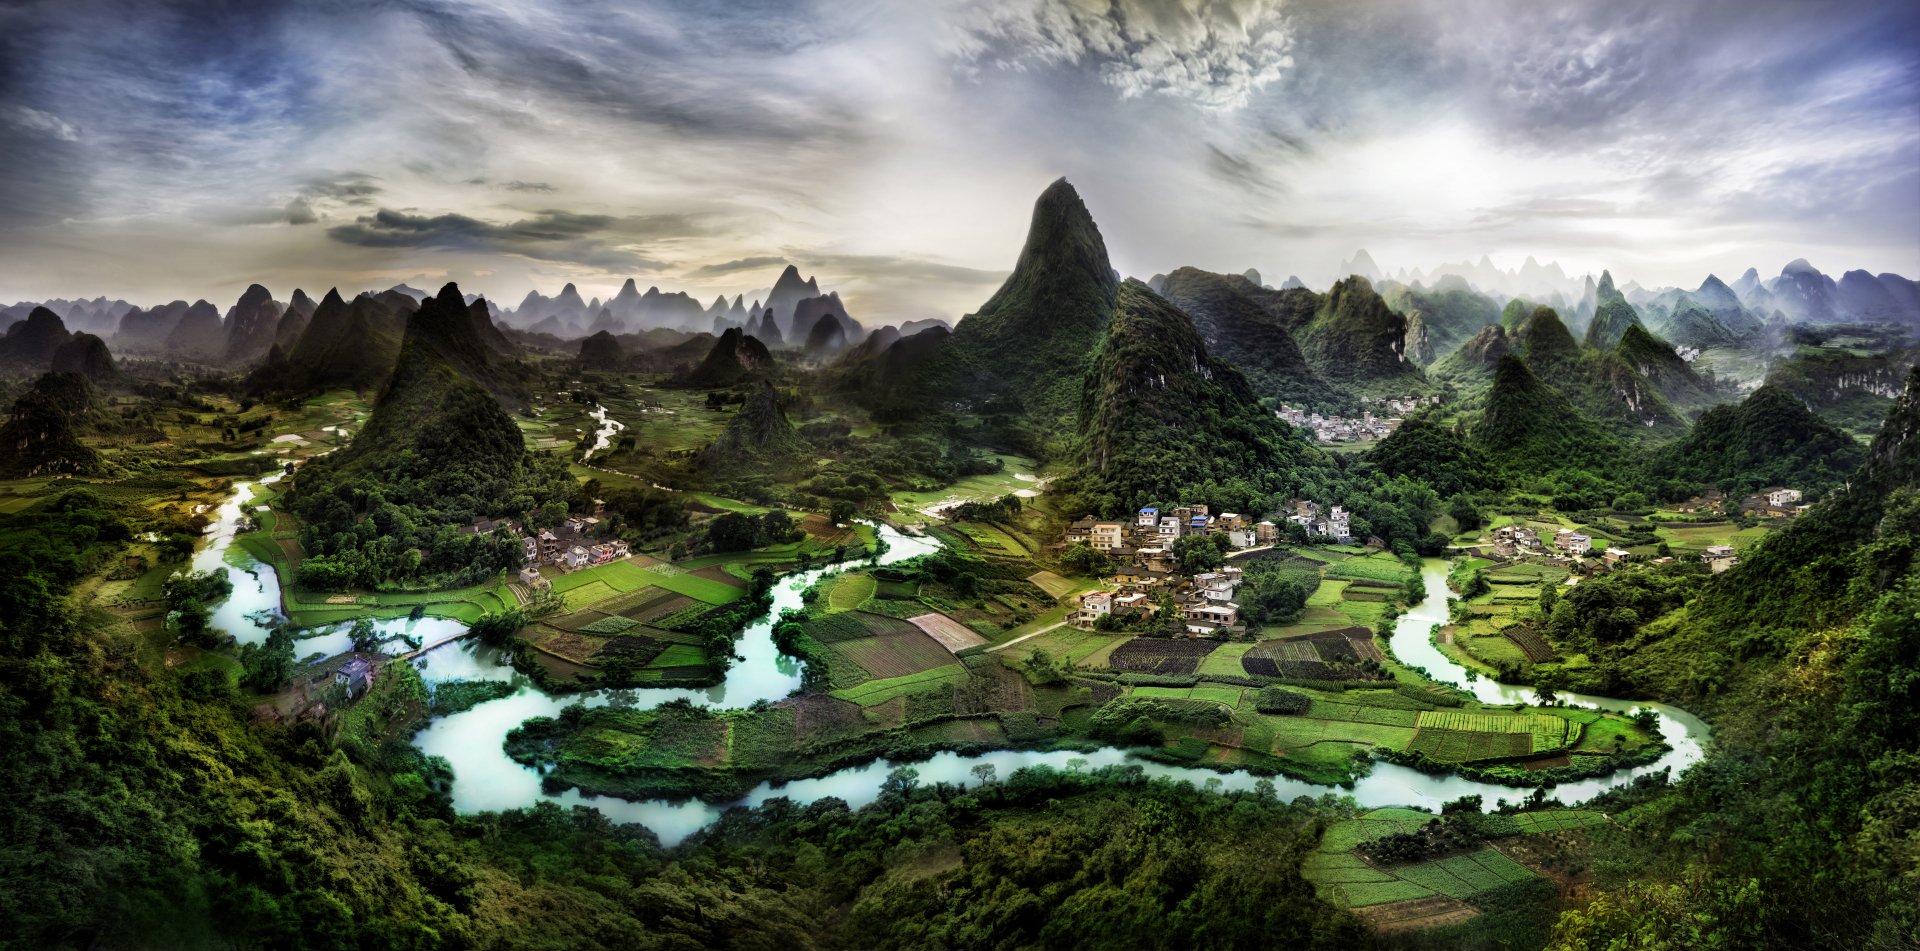 China Hd Wallpapers Background Images, Beautiful Chinese Landscape Wallpaper